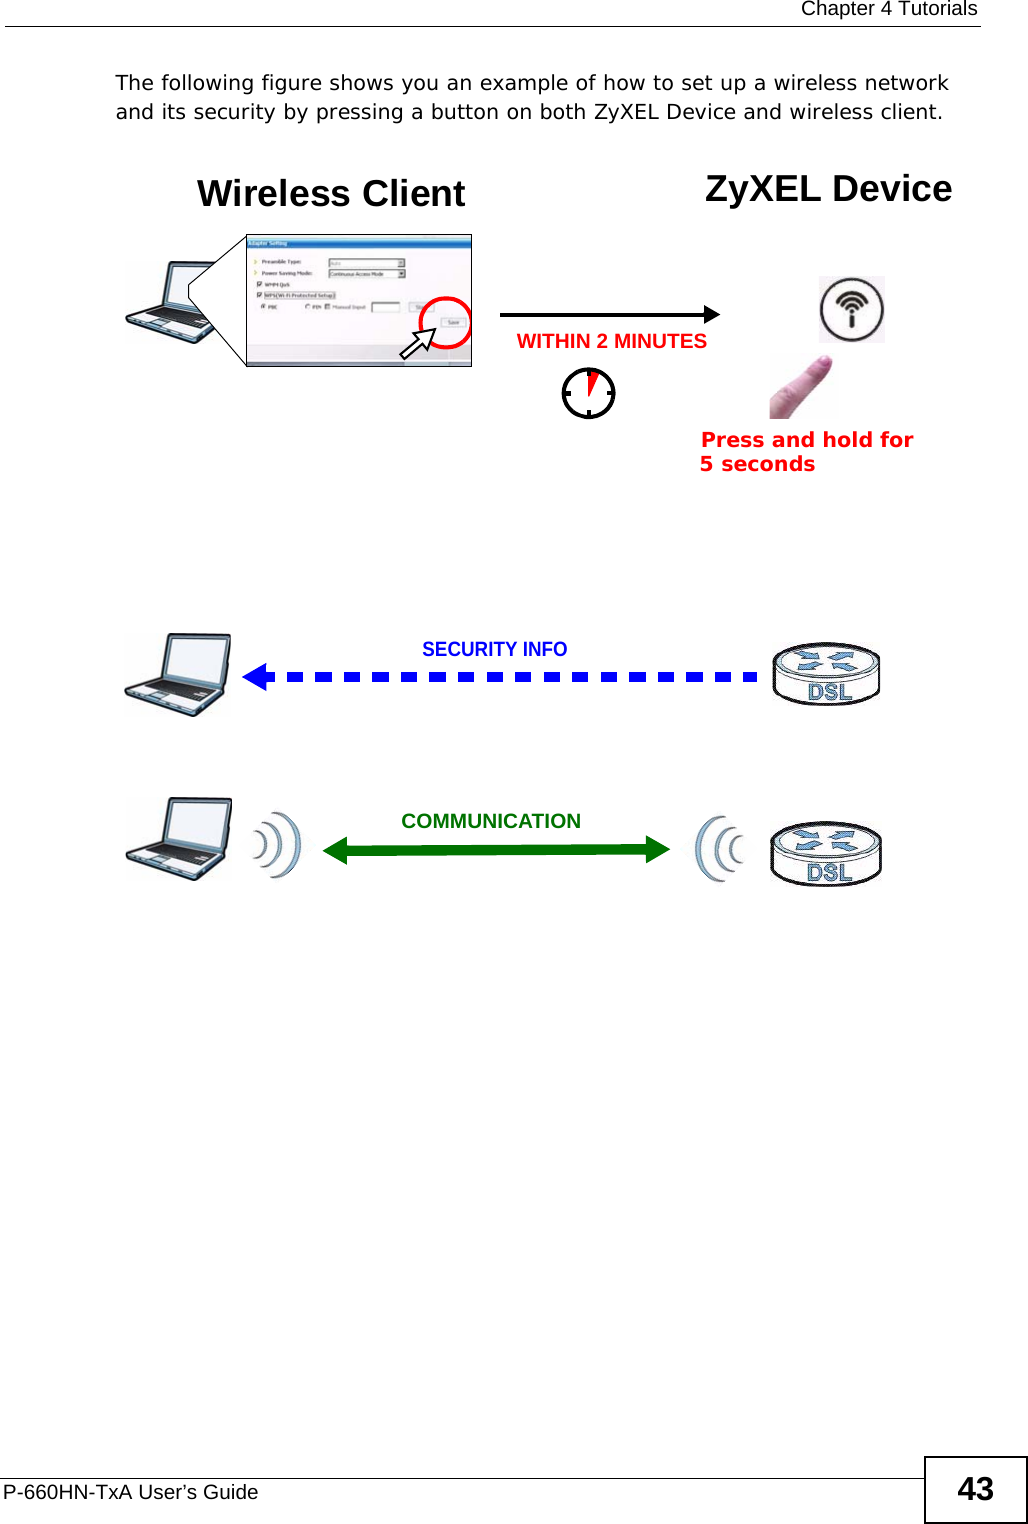  Chapter 4 TutorialsP-660HN-TxA User’s Guide 43The following figure shows you an example of how to set up a wireless network and its security by pressing a button on both ZyXEL Device and wireless client.Example WPS Process: PBC MethodWireless Client ZyXEL DeviceSECURITY INFOCOMMUNICATIONWITHIN 2 MINUTESPress and hold for   5 seconds